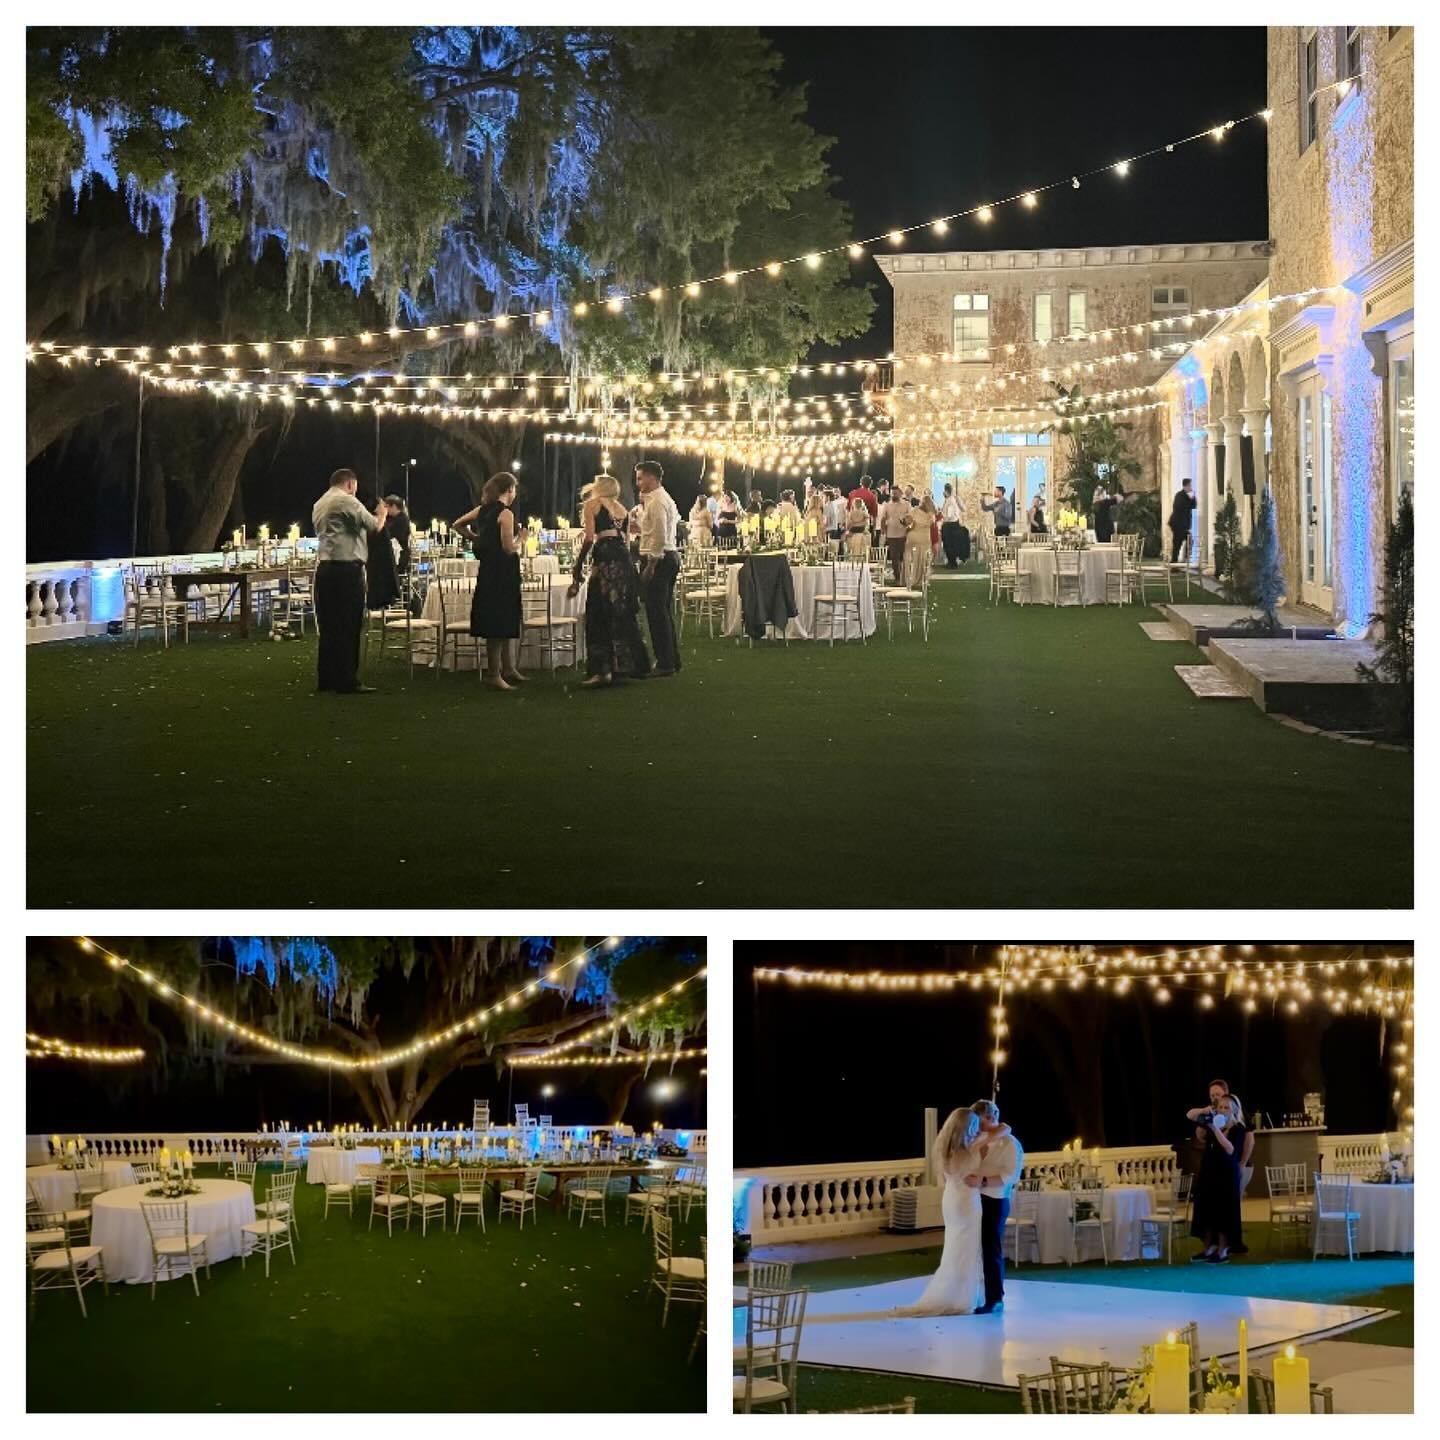 Lovely outdoor reception, with our Market Lighting and White Dance Floor, at Bella Cosa. &mdash;&mdash;&mdash;&mdash;&mdash;&mdash;&mdash;&mdash;&mdash;&mdash;&mdash;&mdash;&mdash;&mdash;&mdash;&mdash;&mdash;&mdash;&mdash;&mdash;&mdash;&mdash;&mdash;